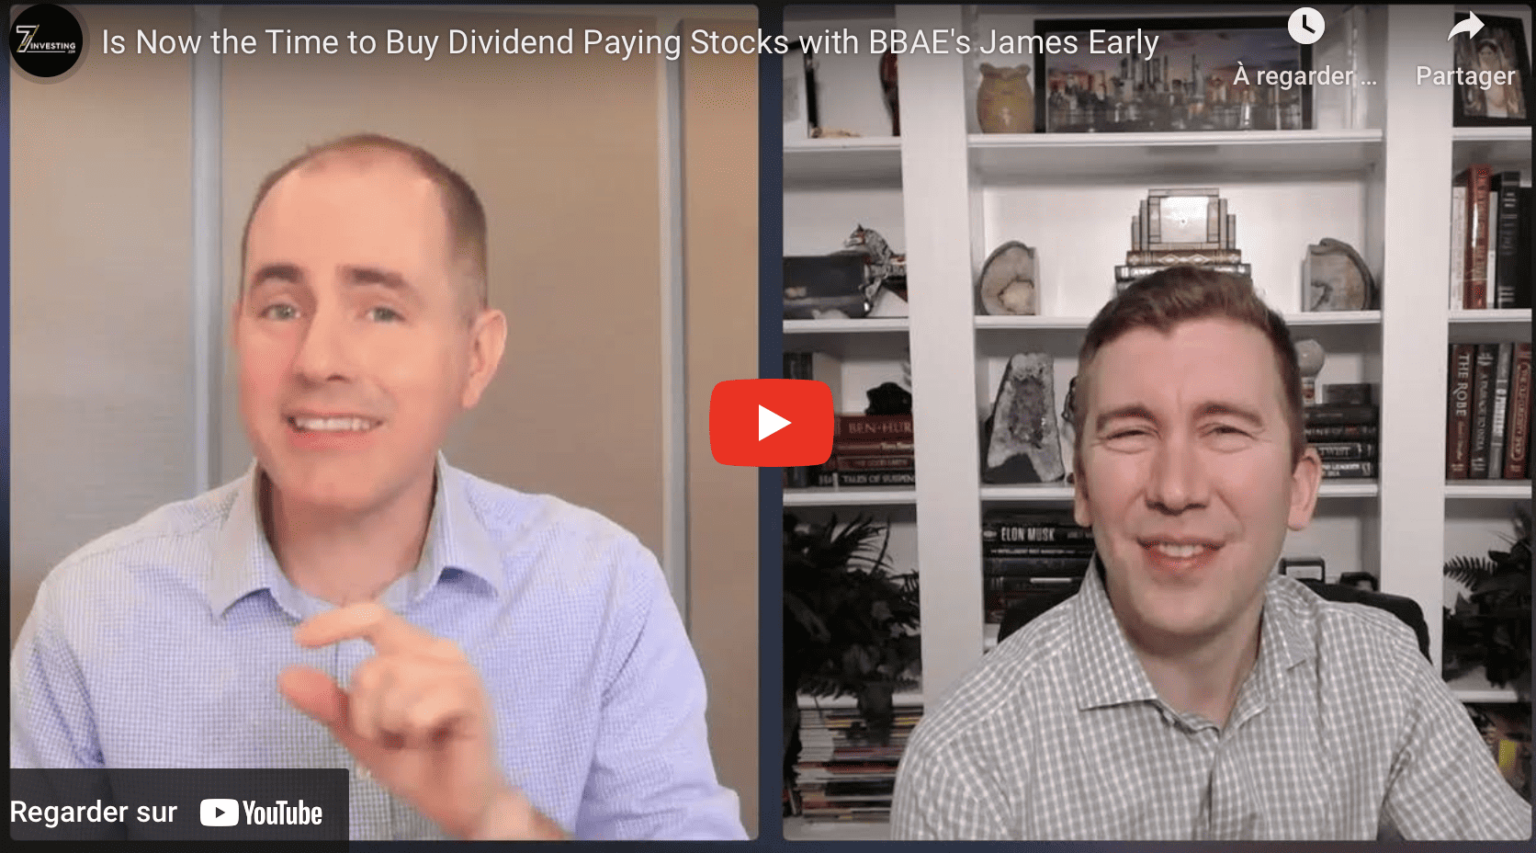 Is now the time to buy dividend paying stocks?